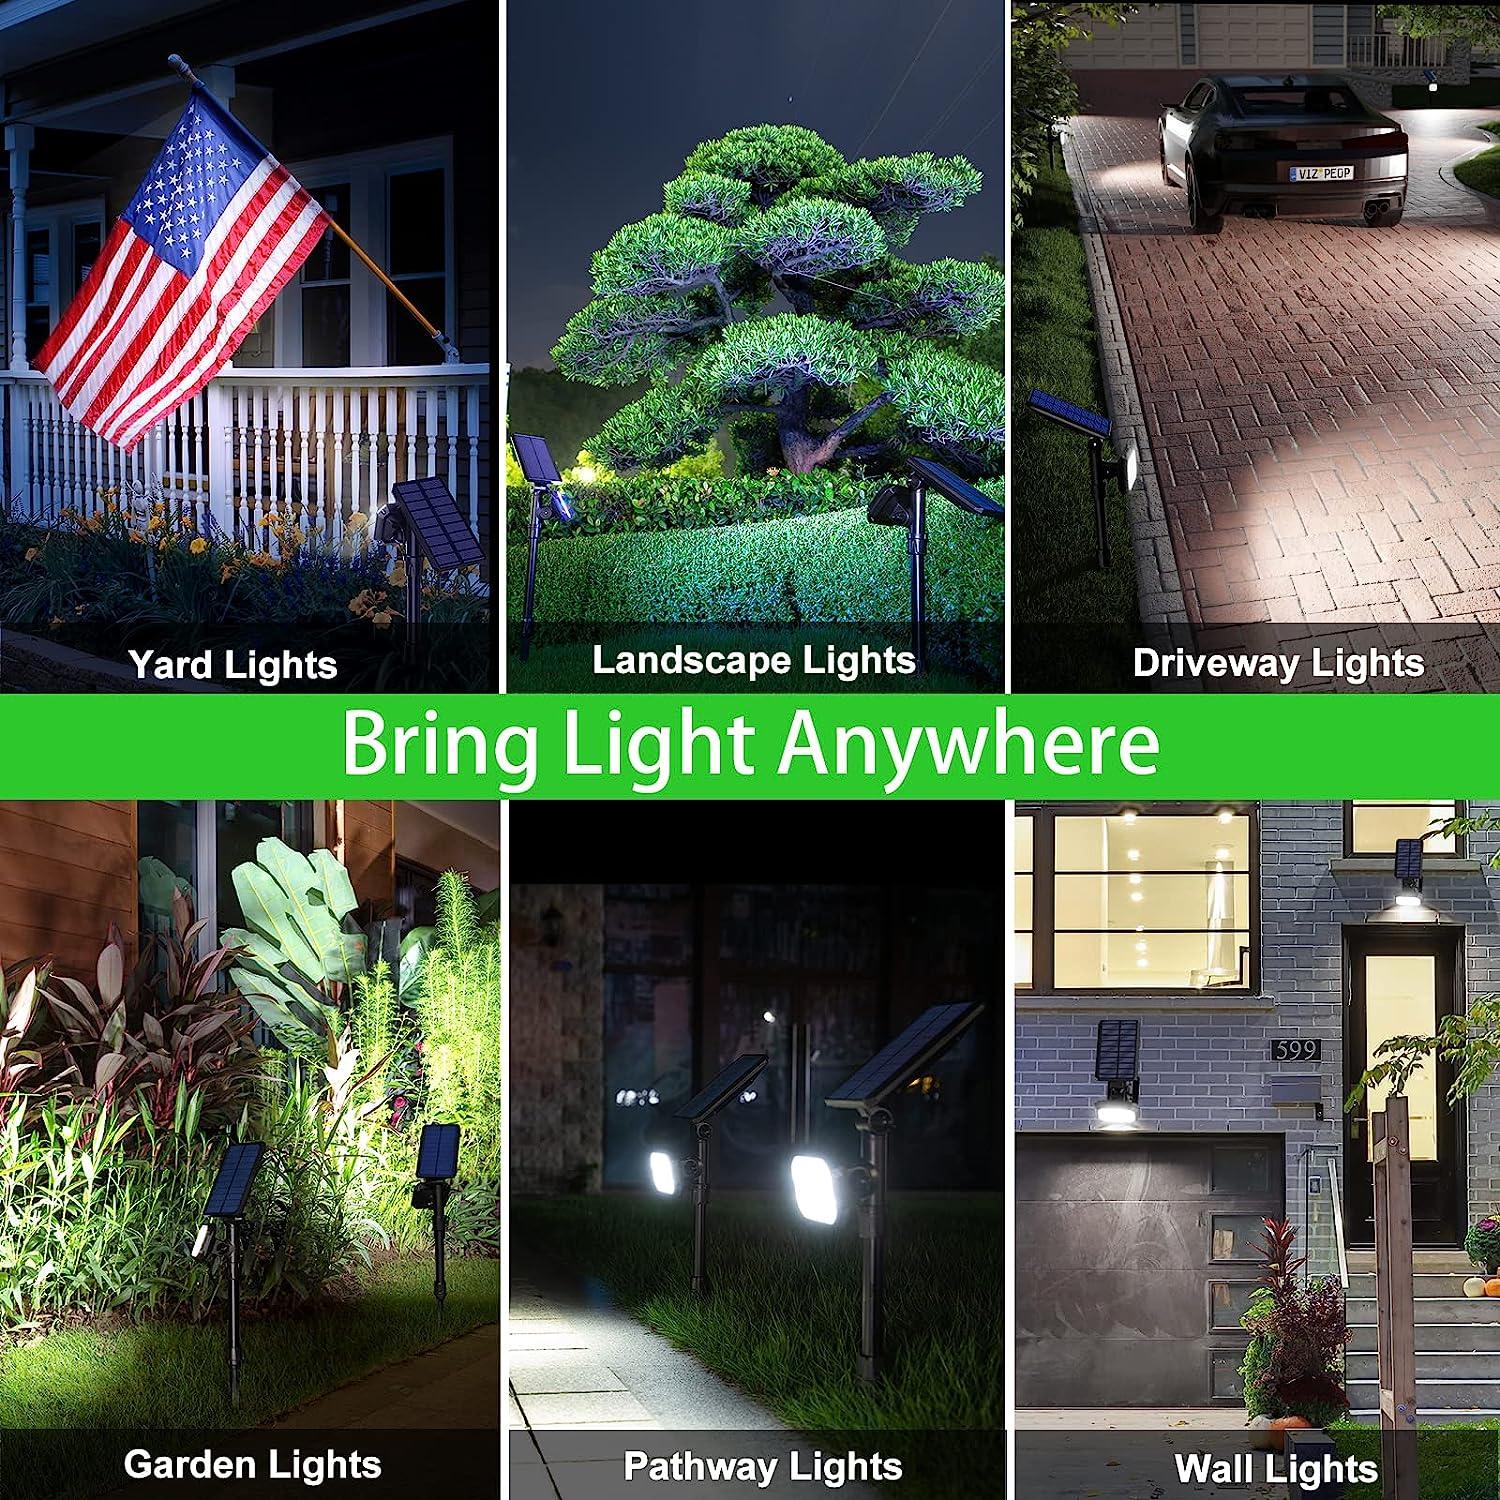 LazyLights X27 - Solar Landscape Spotlights Outdoor with 27 LEDS | IP65 Waterproof | Landscape Path Lights for Walkway - Lazy Pro